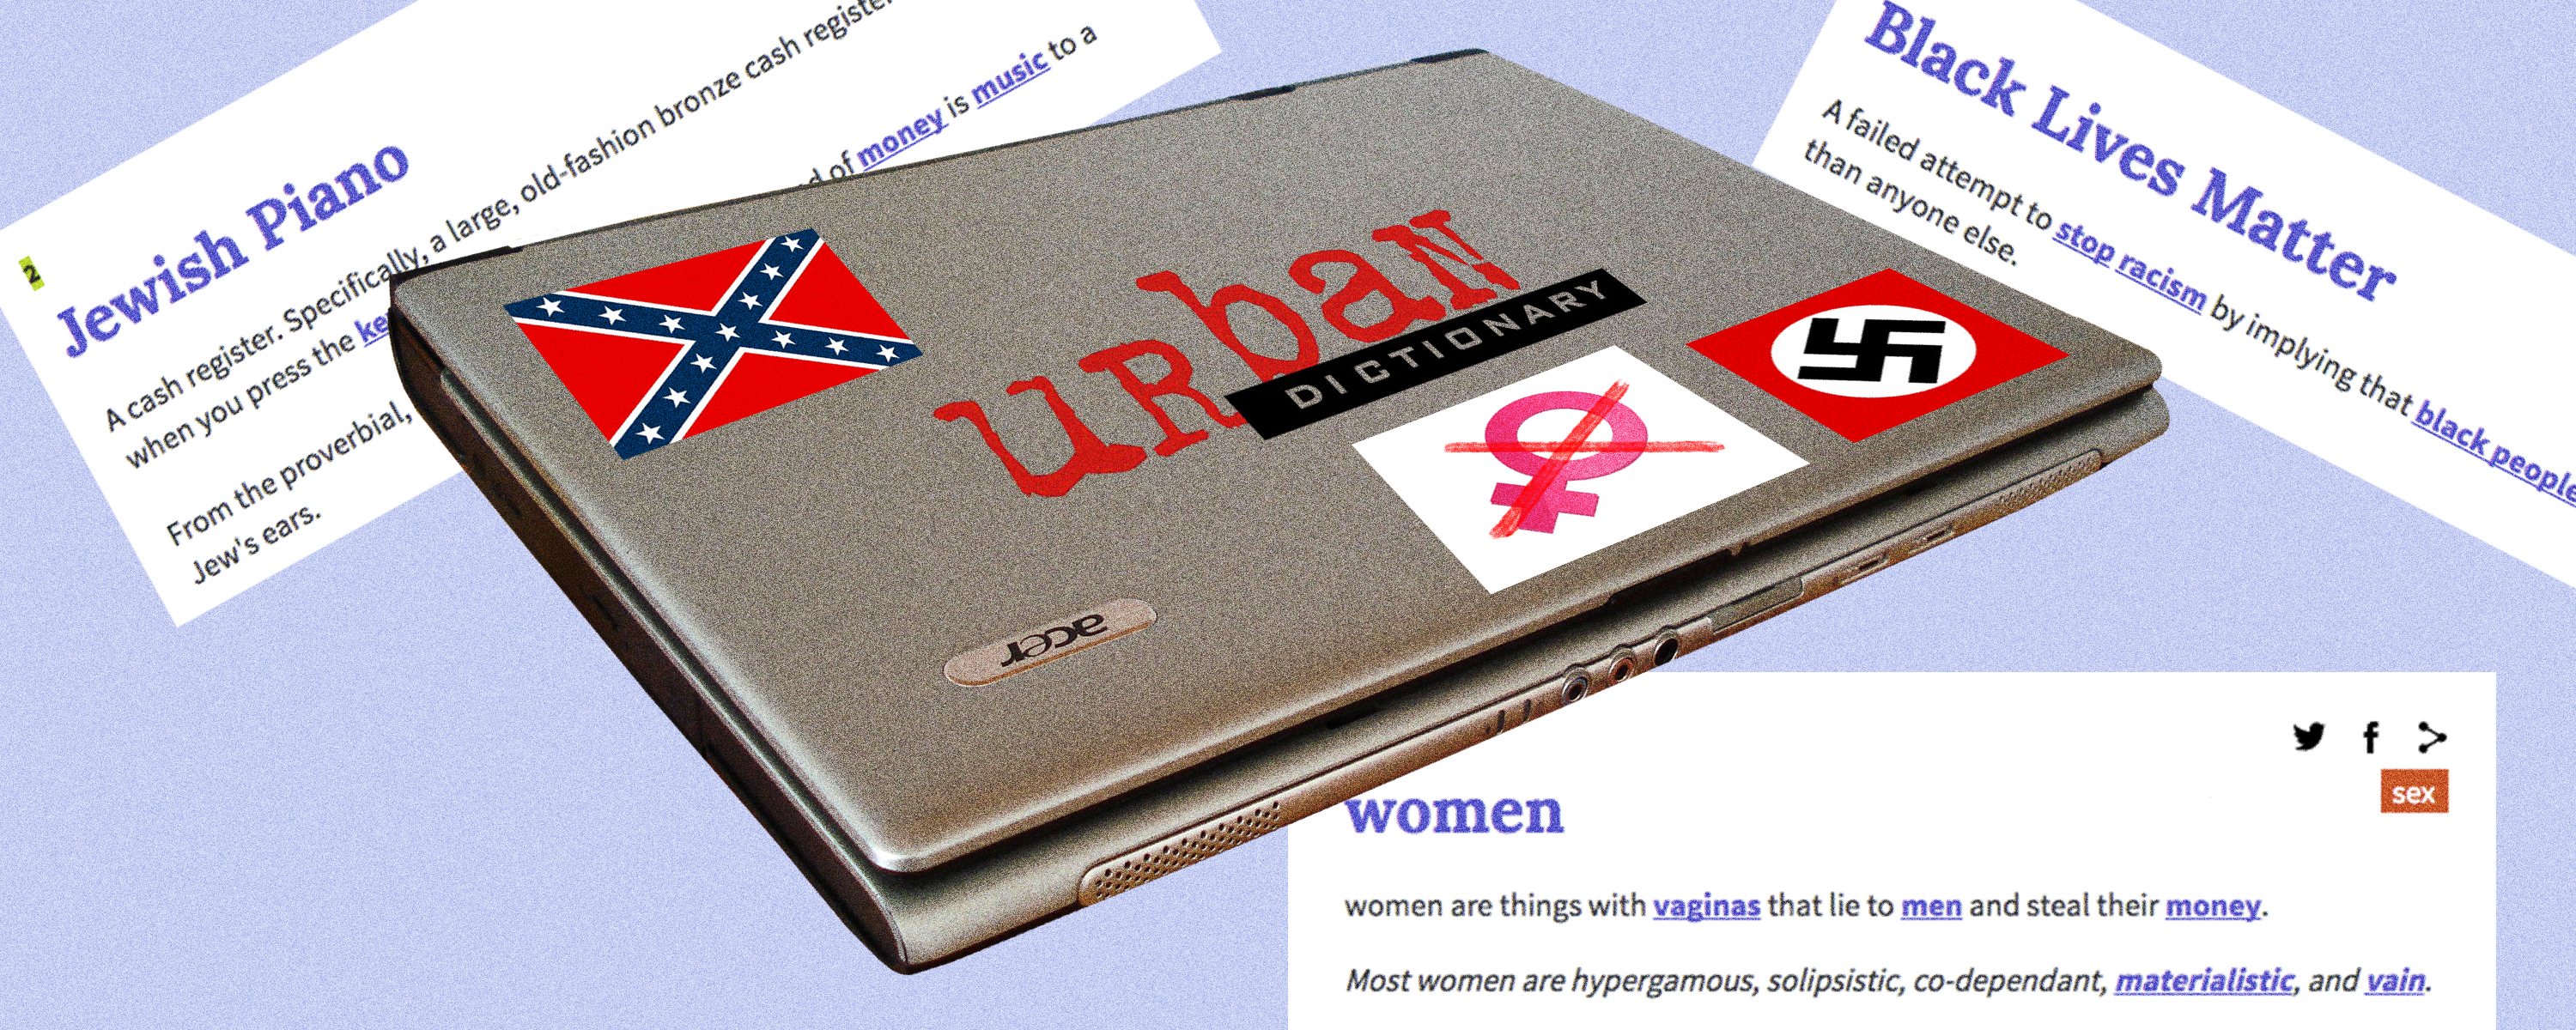 How Urban Dictionary Became a Cesspool for Racists and Misogynists